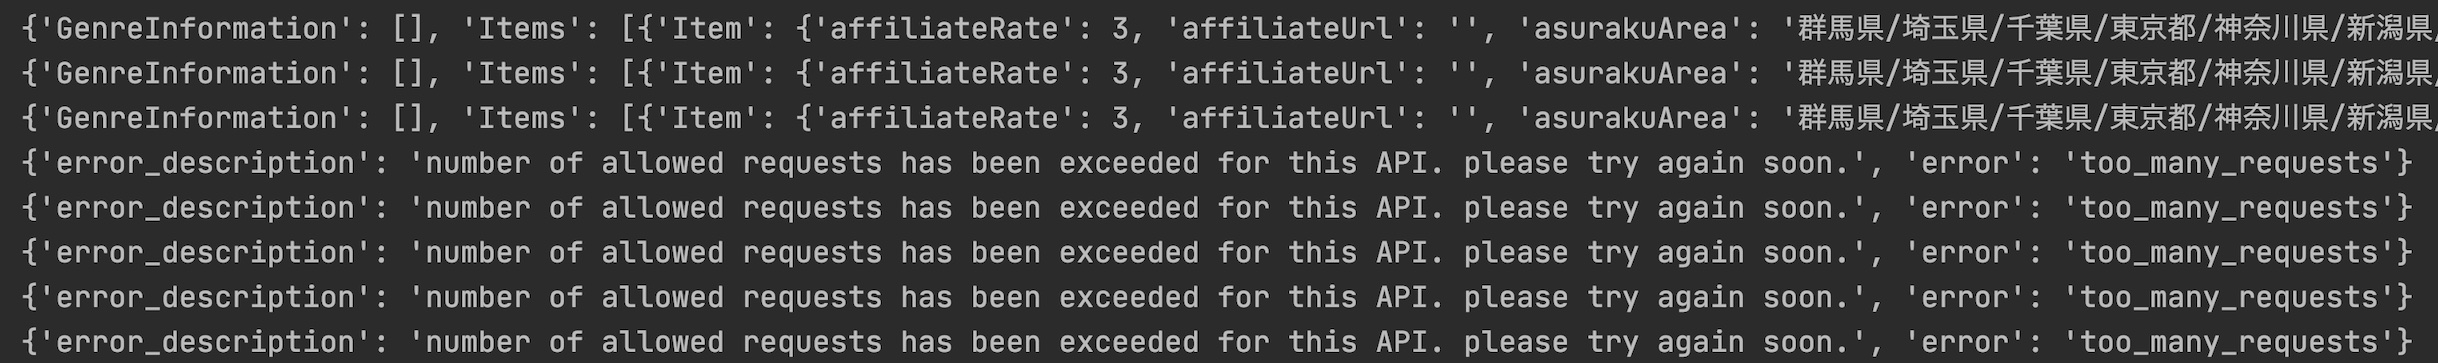 {'error_description': 'number of allowed requests has been exceeded for this API. please try again soon.', 'error': 'too_many_requests'}が返ってきている python